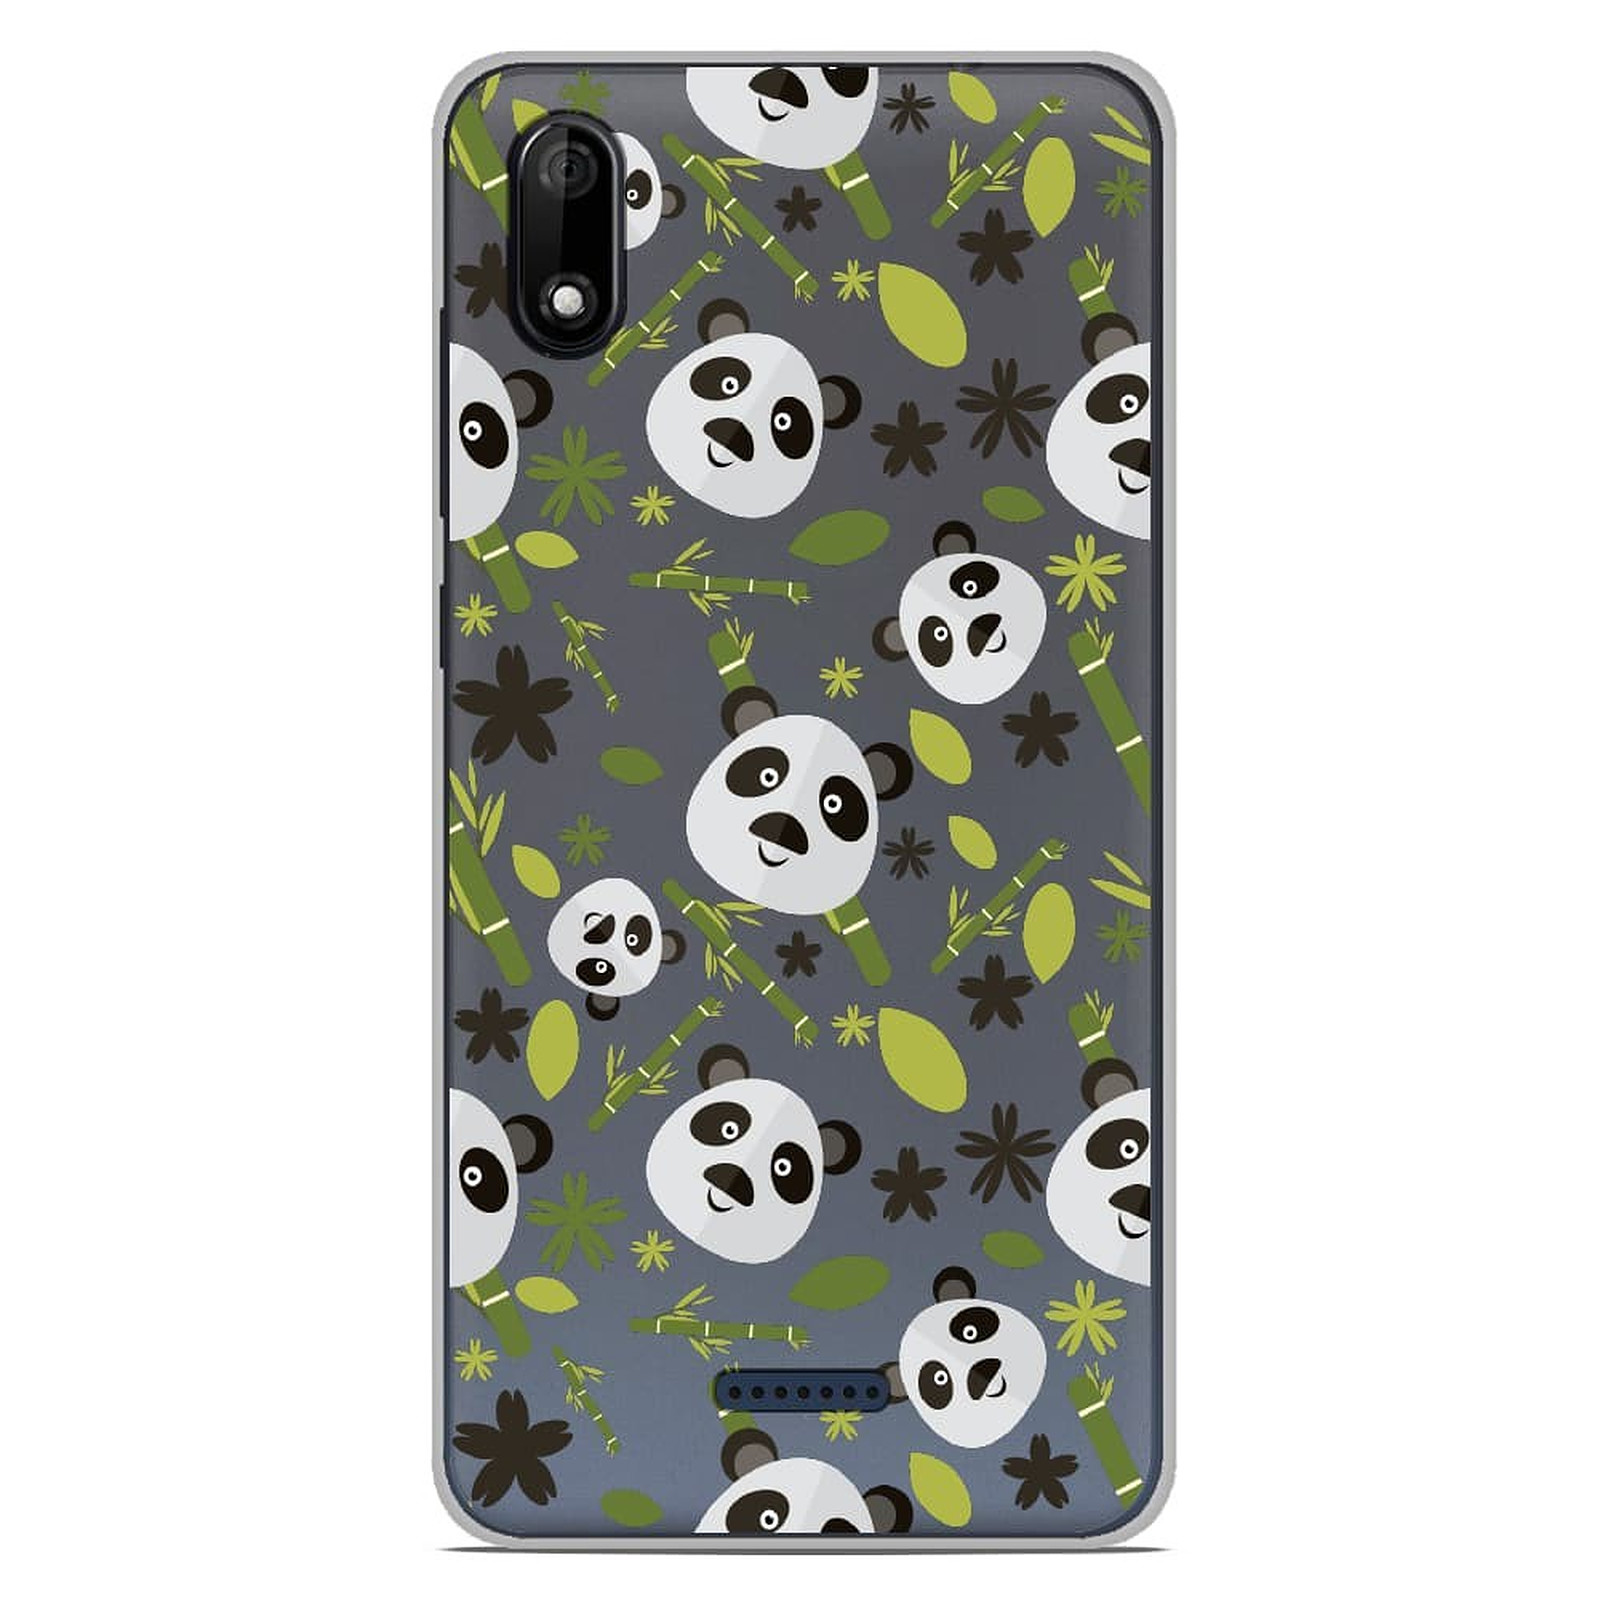 1001 Coques Coque silicone gel Wiko Y80 motif Pandas et Bambou - Coque telephone 1001Coques